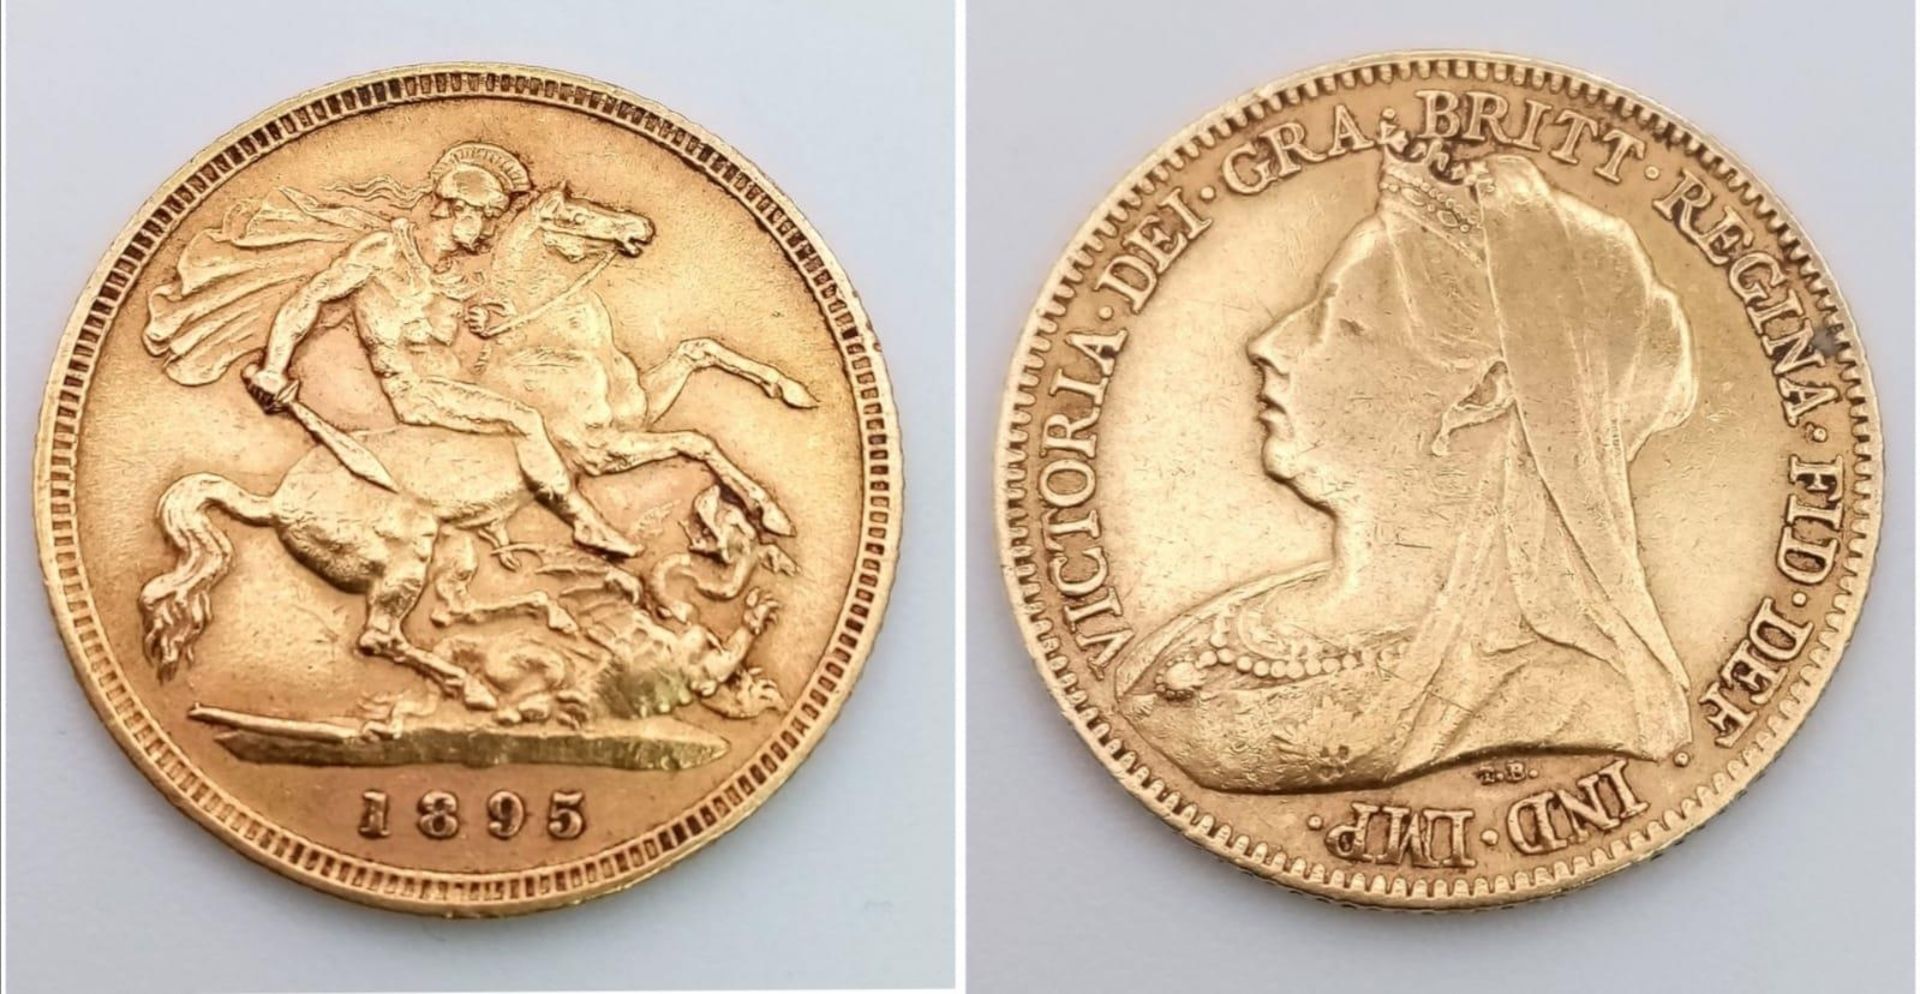 A 22K GOLD HALF SOVEREIGN DATED 1895 WITH VEIL HEAD QUEEN VICTORIA .